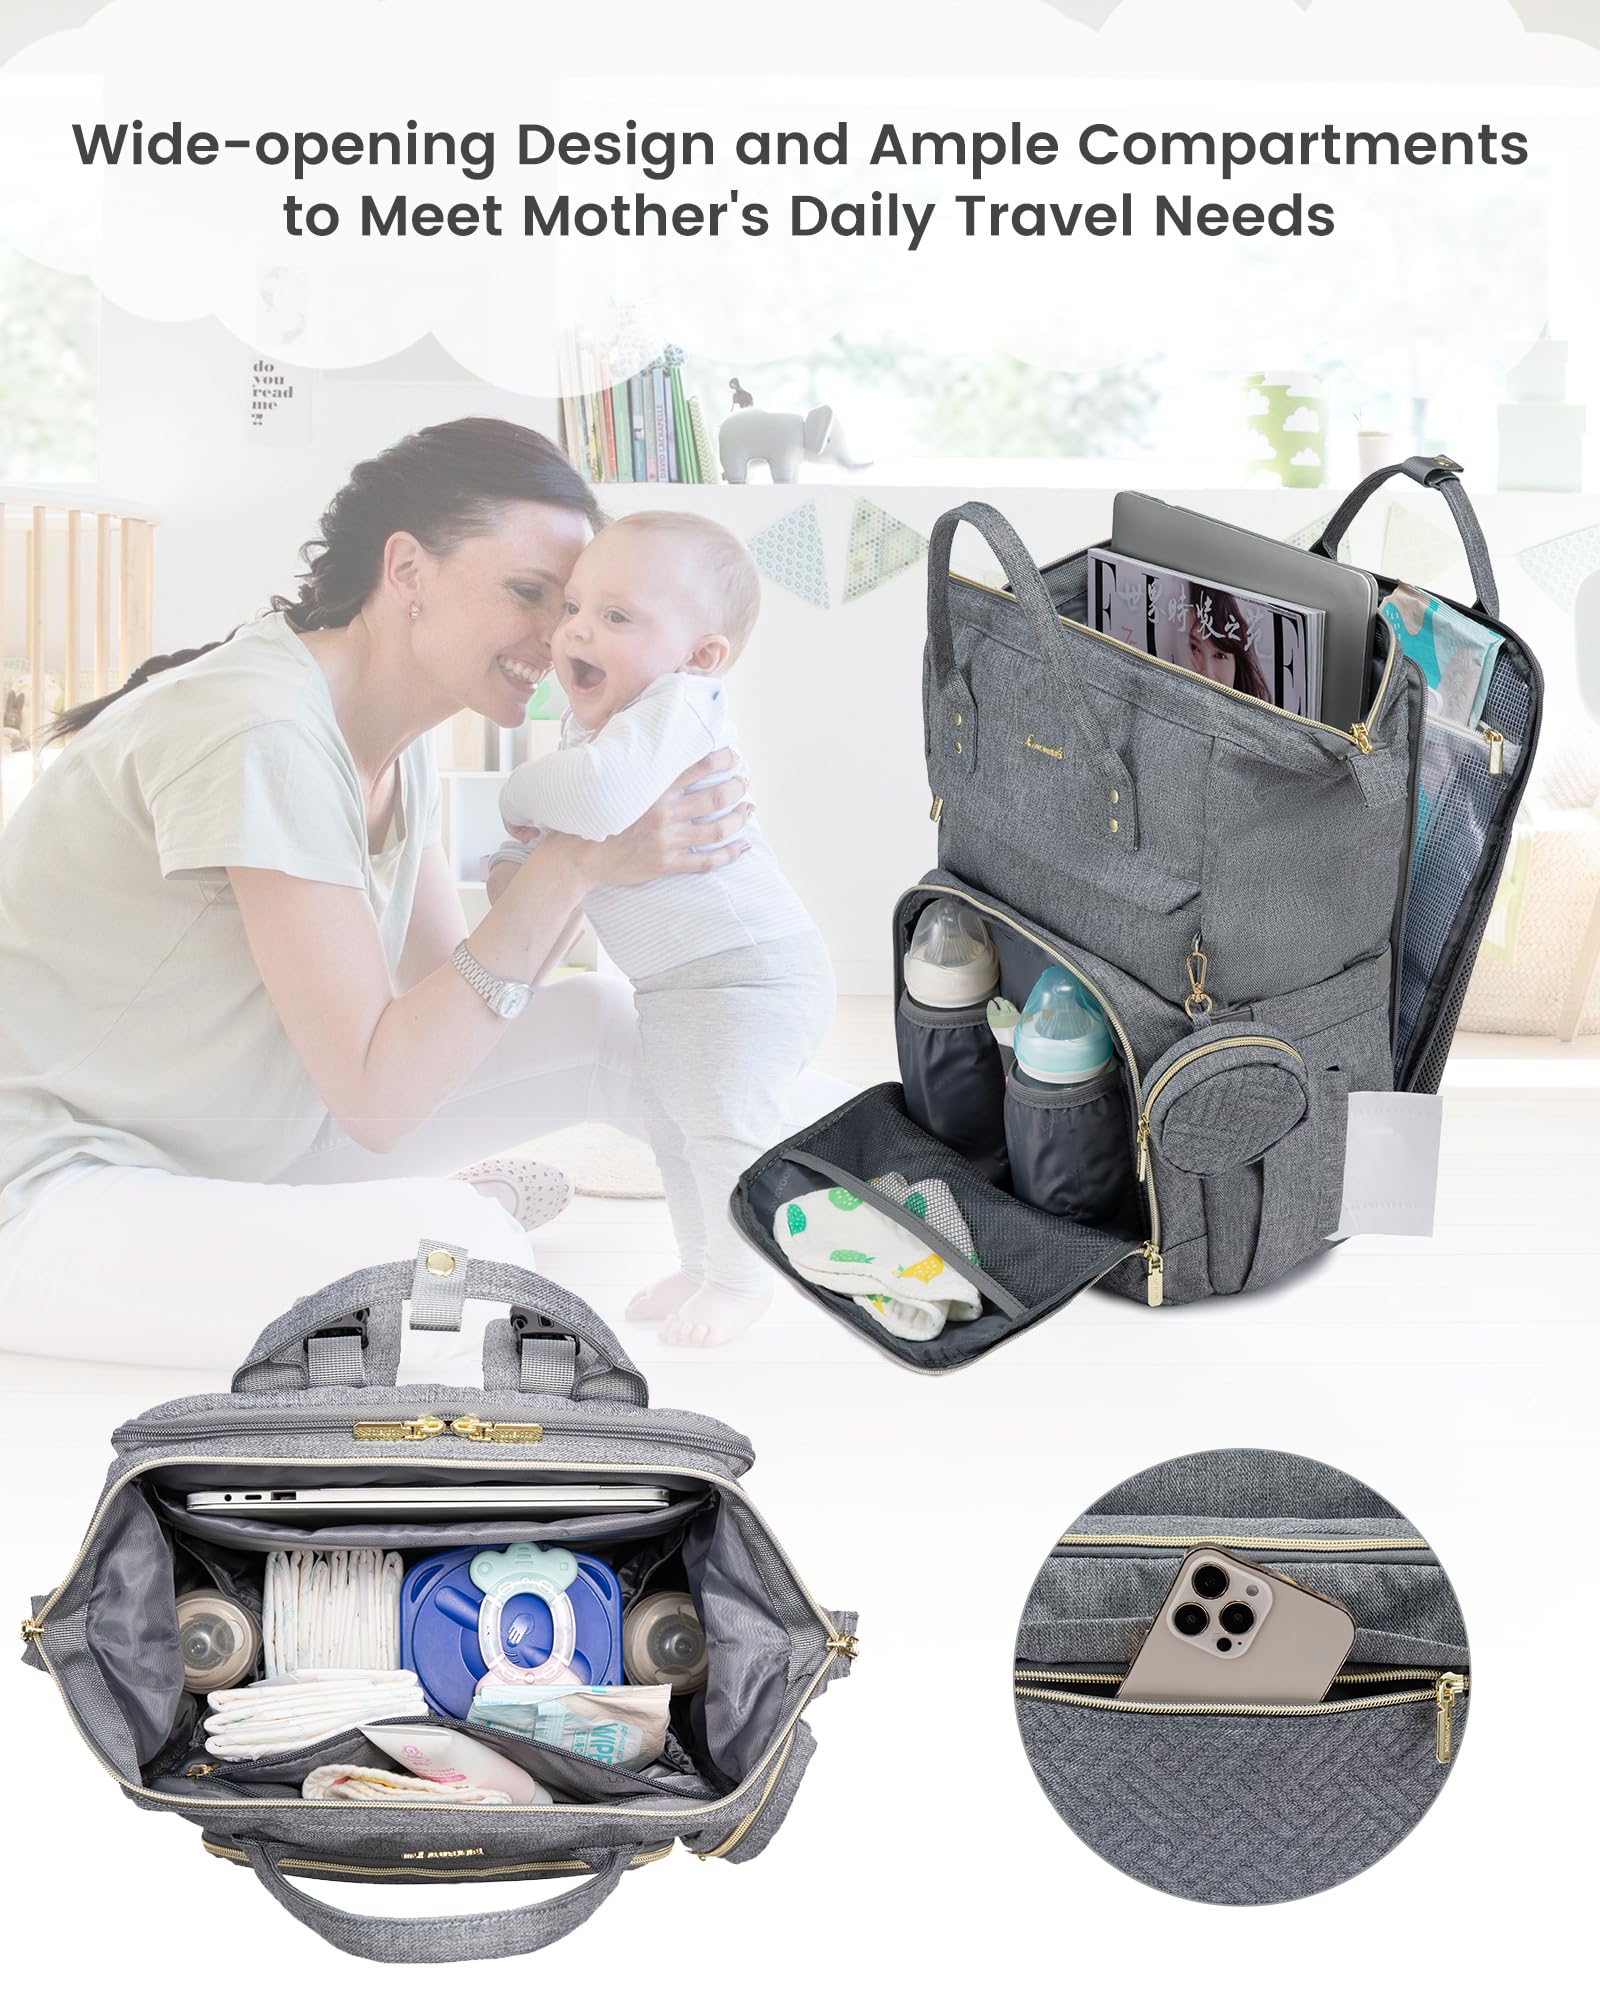 LOVEVOOK Diaper Bag Backpack, Multi functions Baby Bags with Diaper Compartments, Large Nappy Bag with Changing Pad & Pacifier Case, Unisex Travel Diaper Back Pack, Waterproof & Stylish, Grey